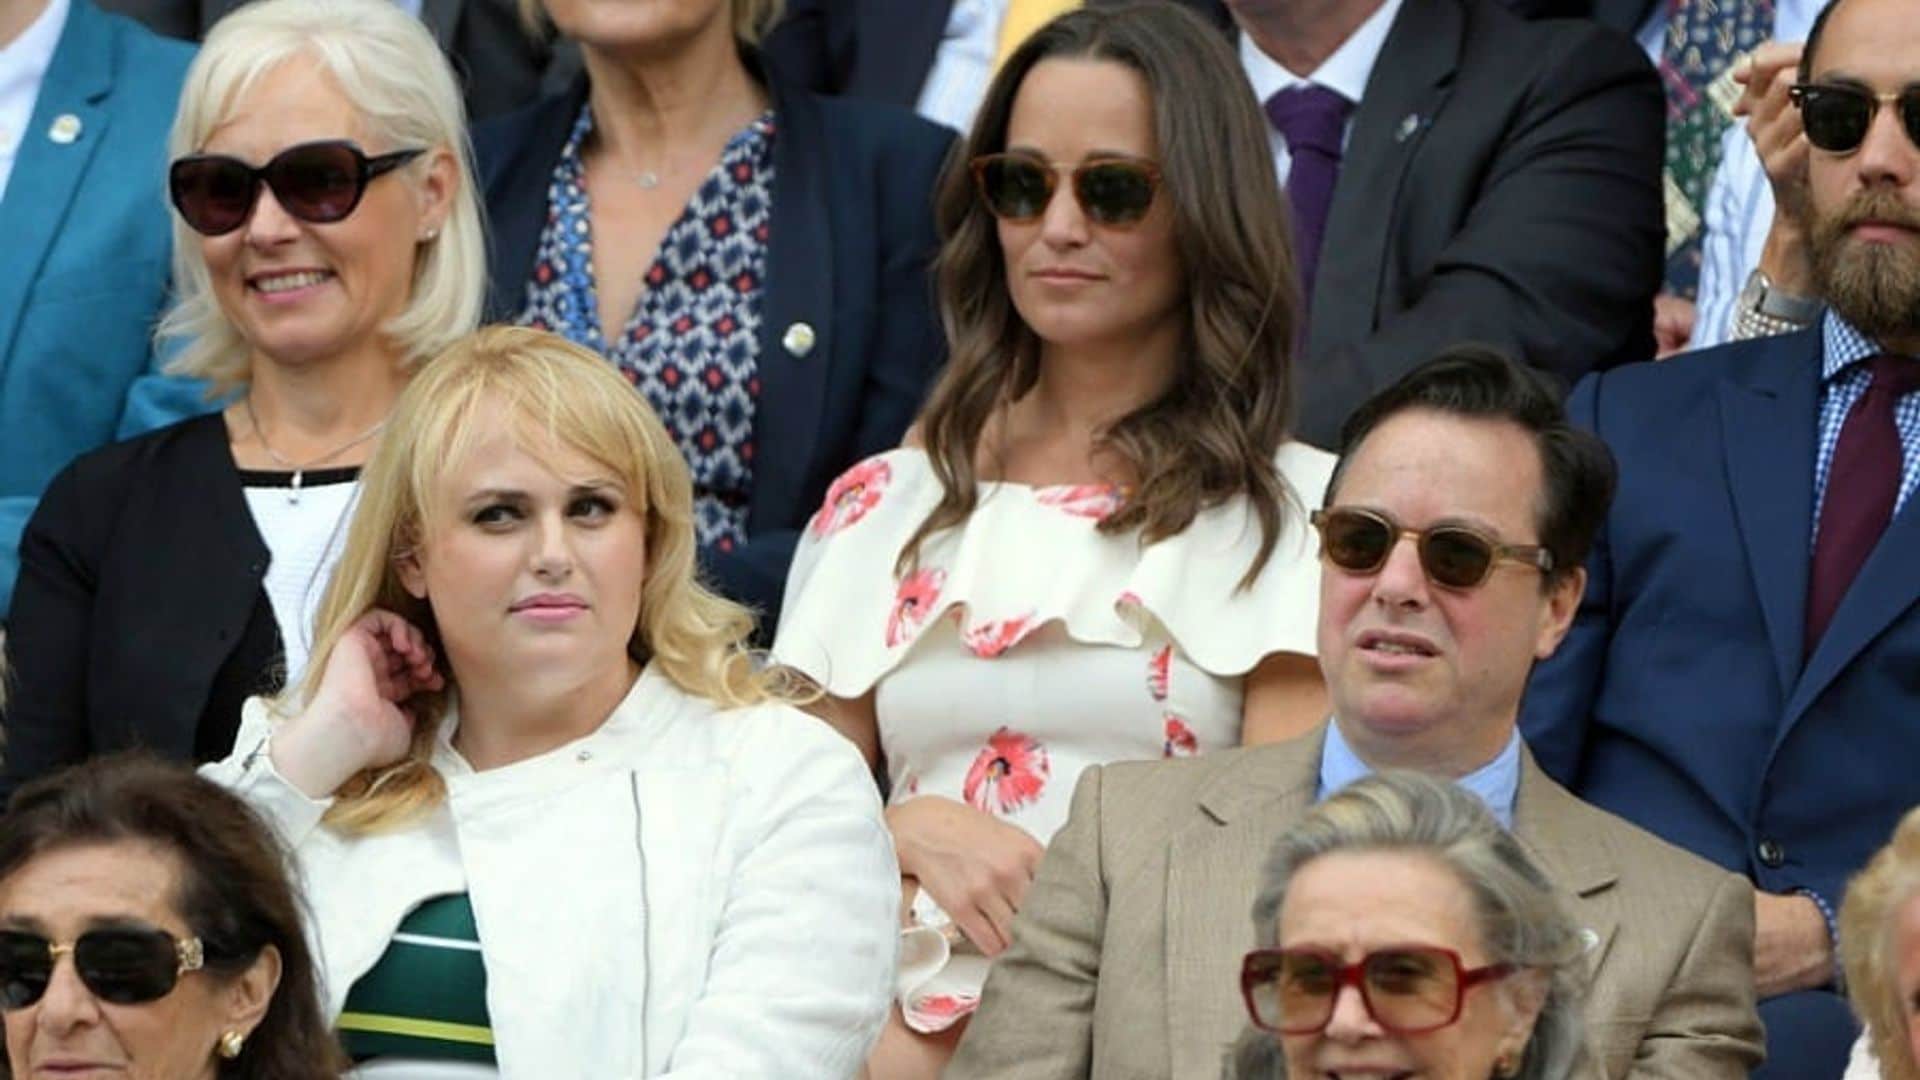 Actress Rebel Wilson was seated in front of the Duchess of Cambridge's siblings.
<br>
Photo: Karwai Tang/WireImage